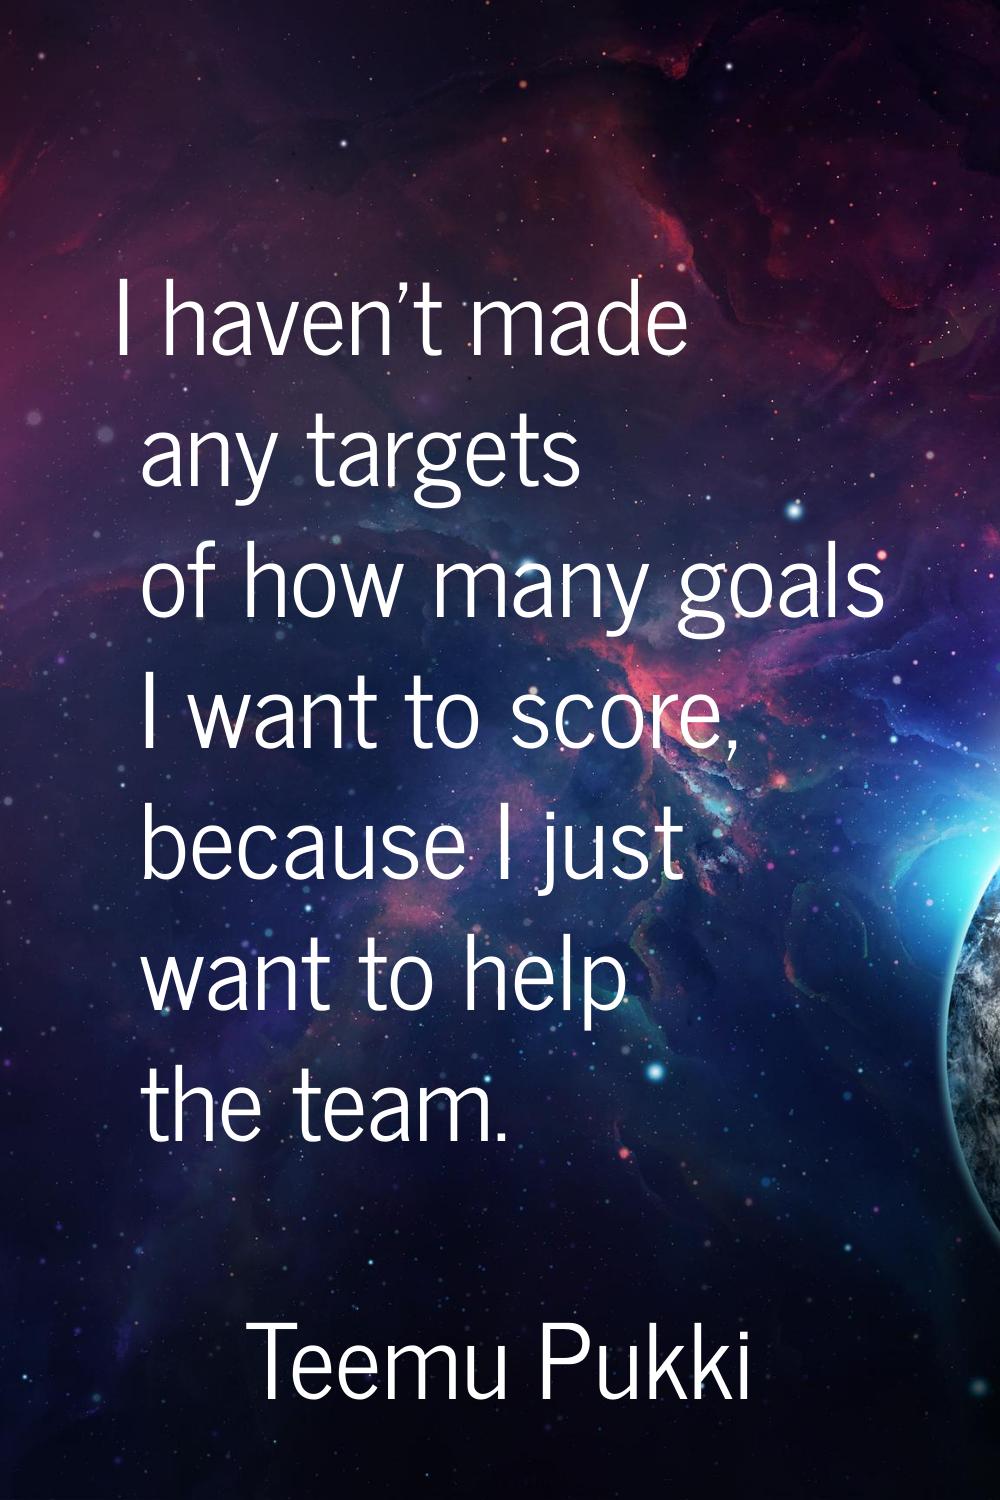 I haven't made any targets of how many goals I want to score, because I just want to help the team.